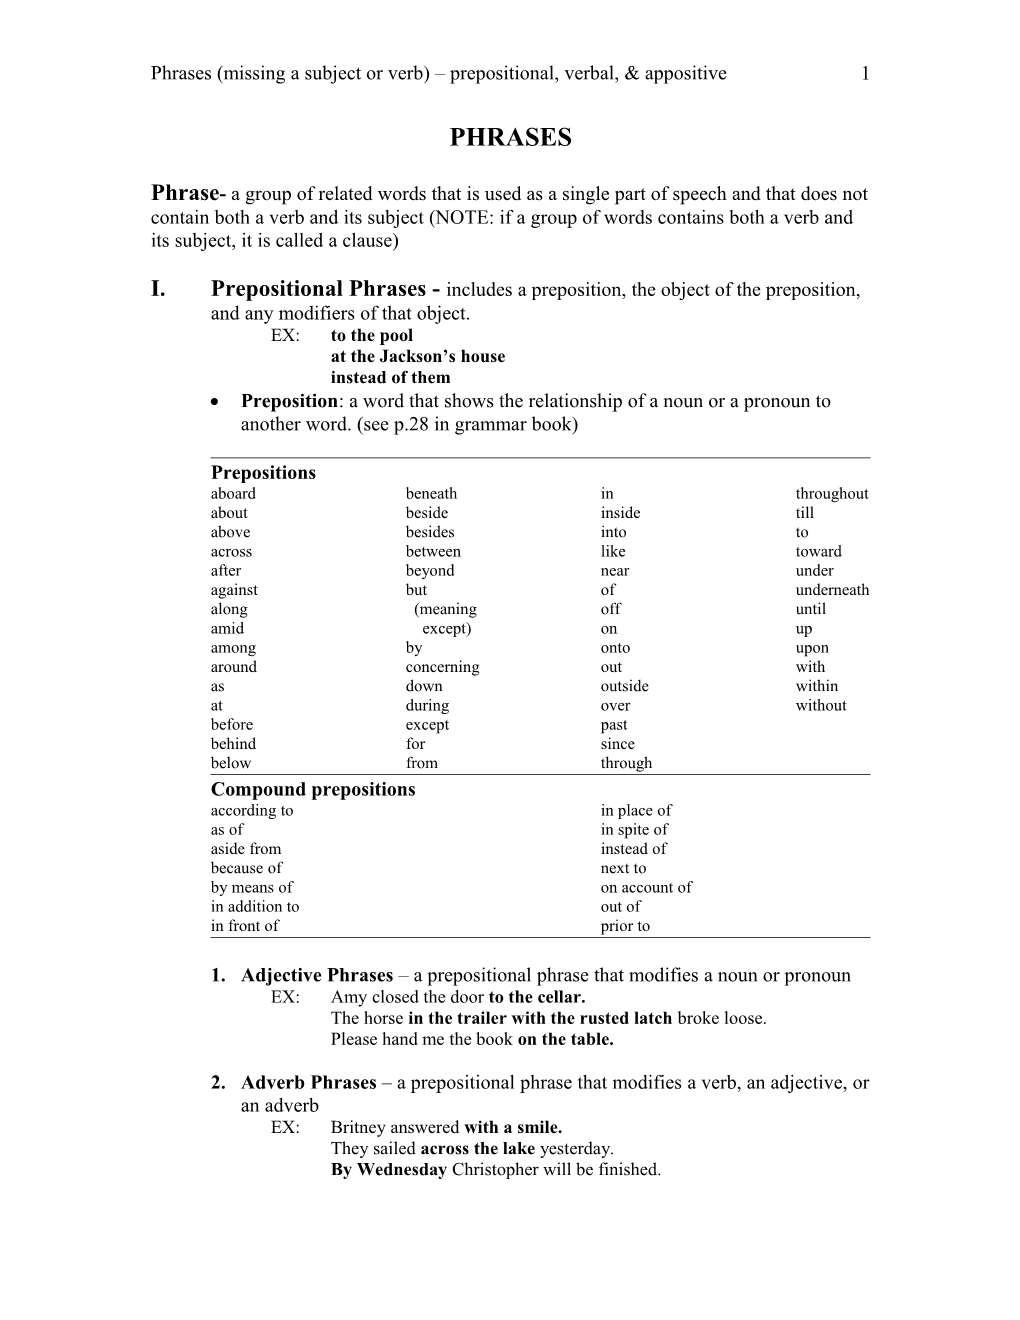 Phrases (Missing a Subject Or Verb) Prepositional, Verbal, & Appositive